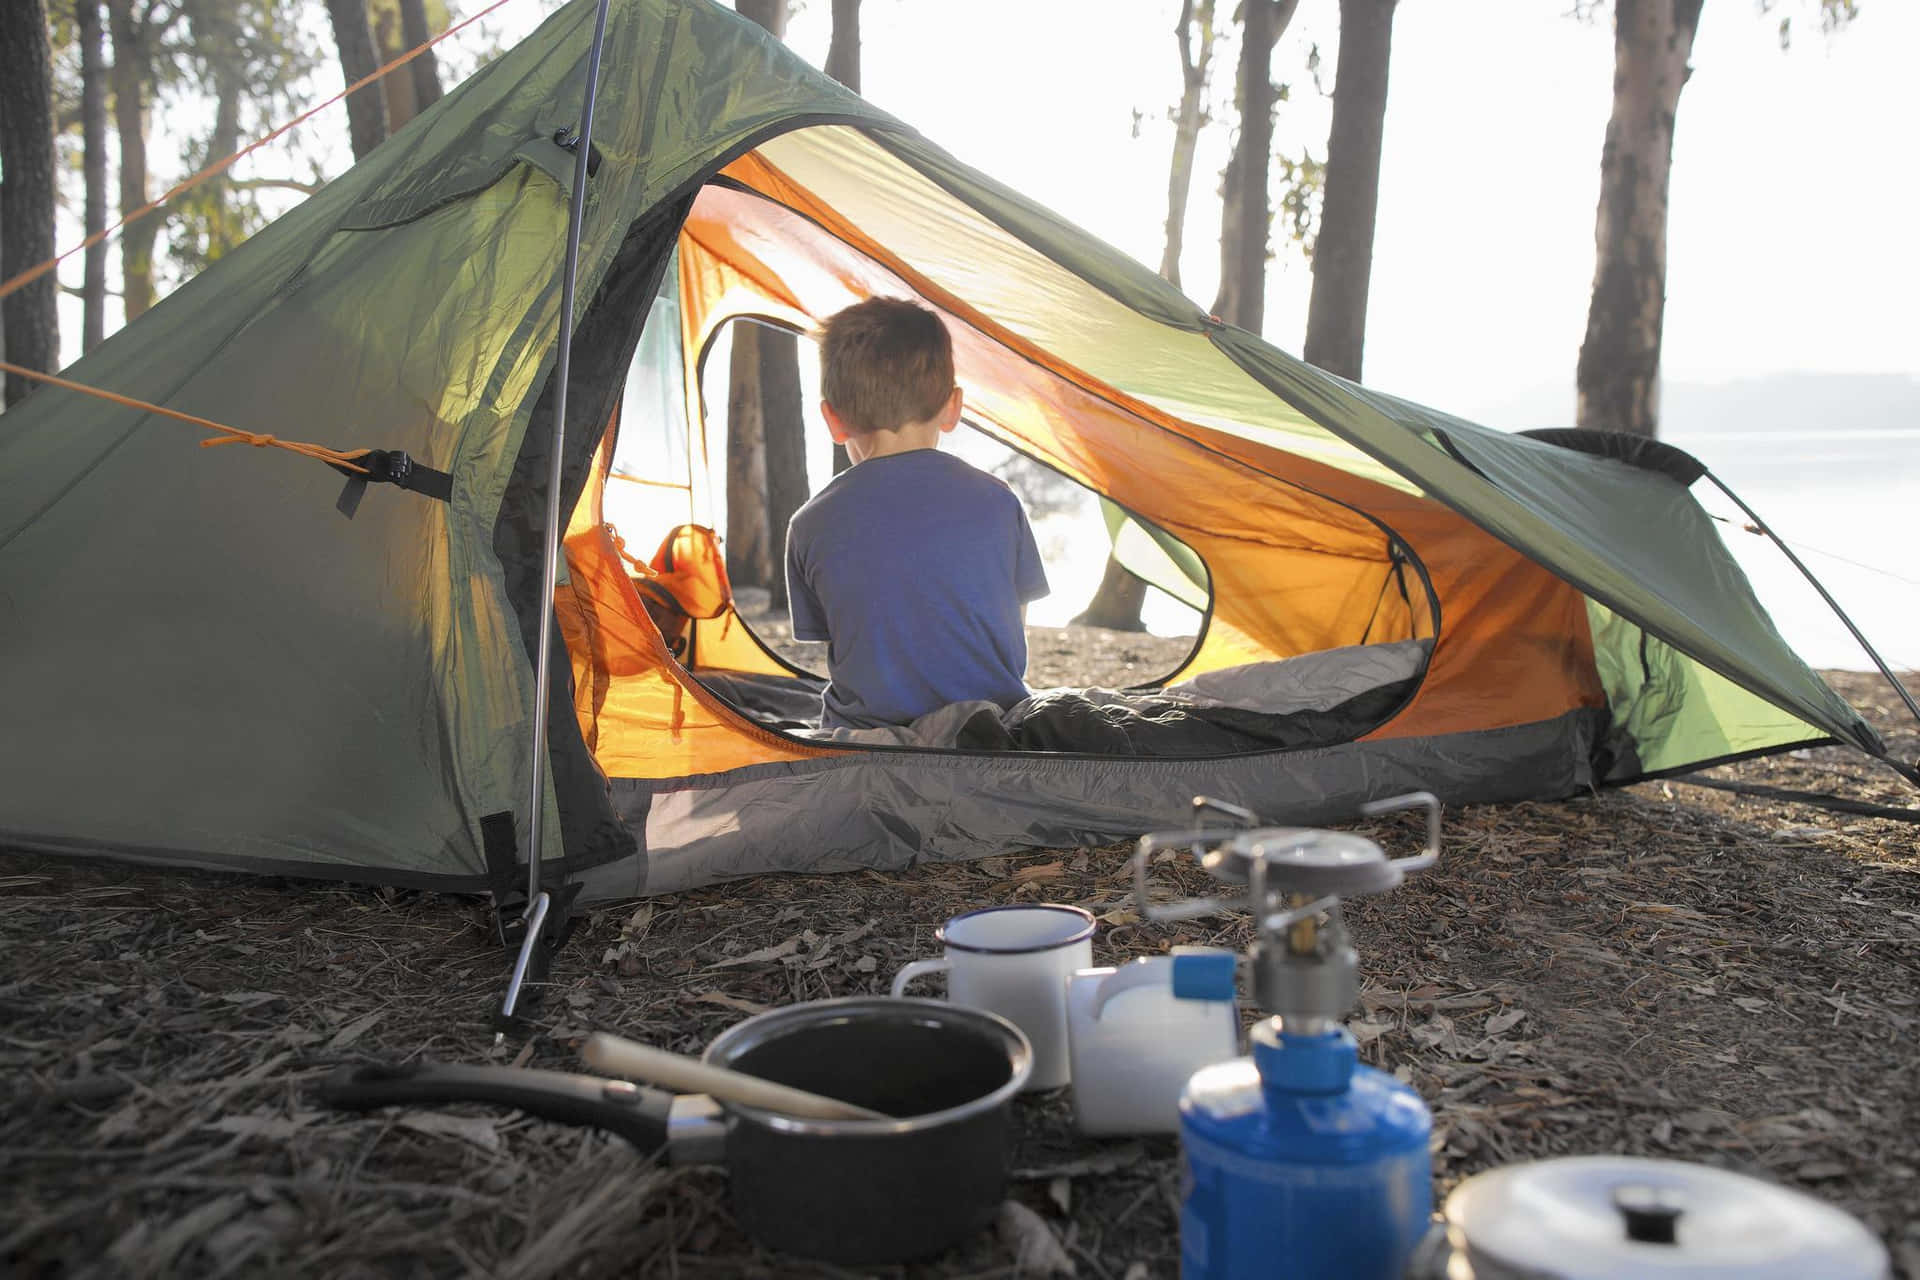 Enjoy a peaceful weekend camping outdoors with friends and family